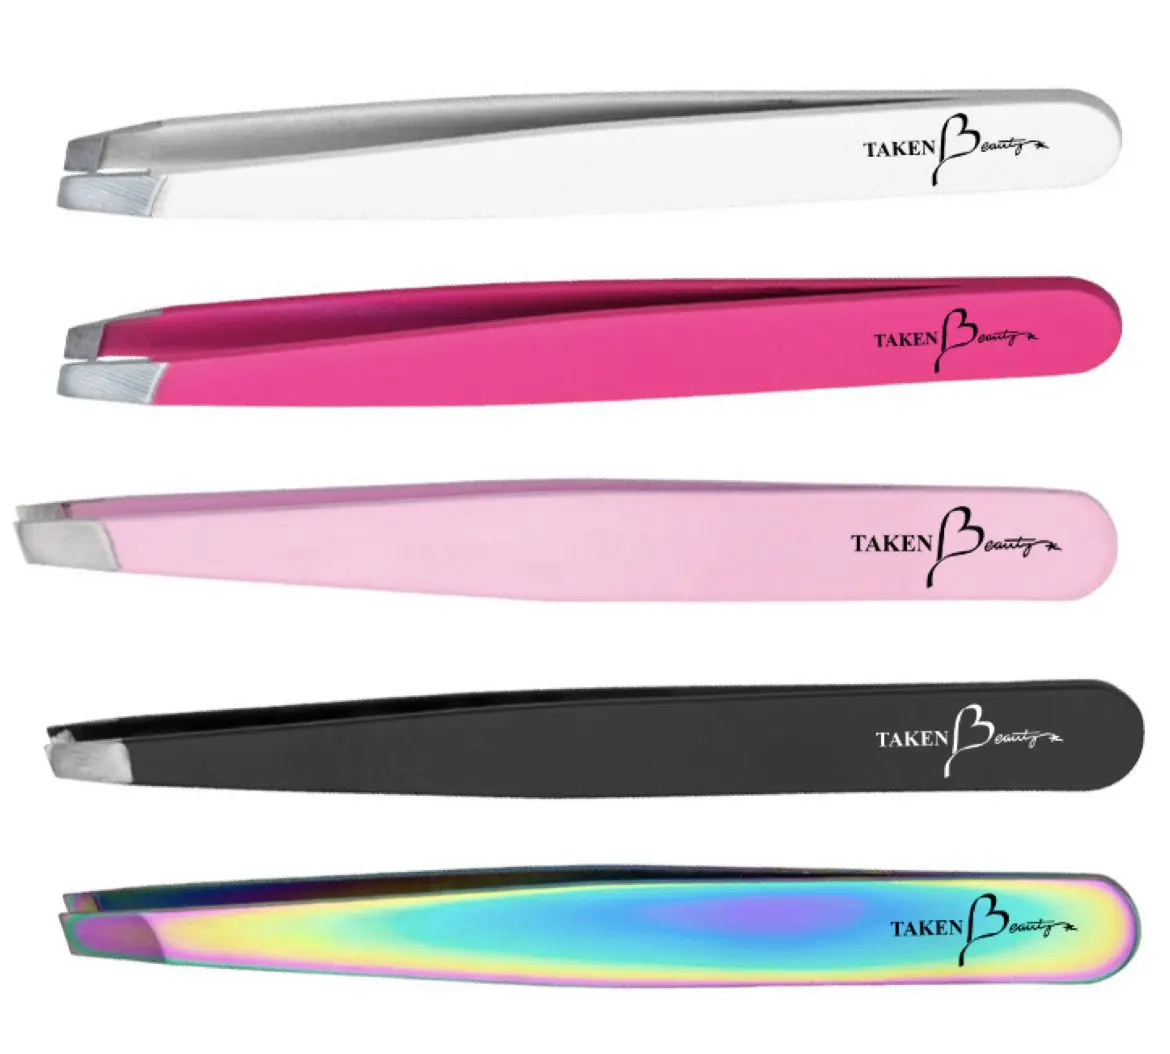 A set of five different colored tweezers.